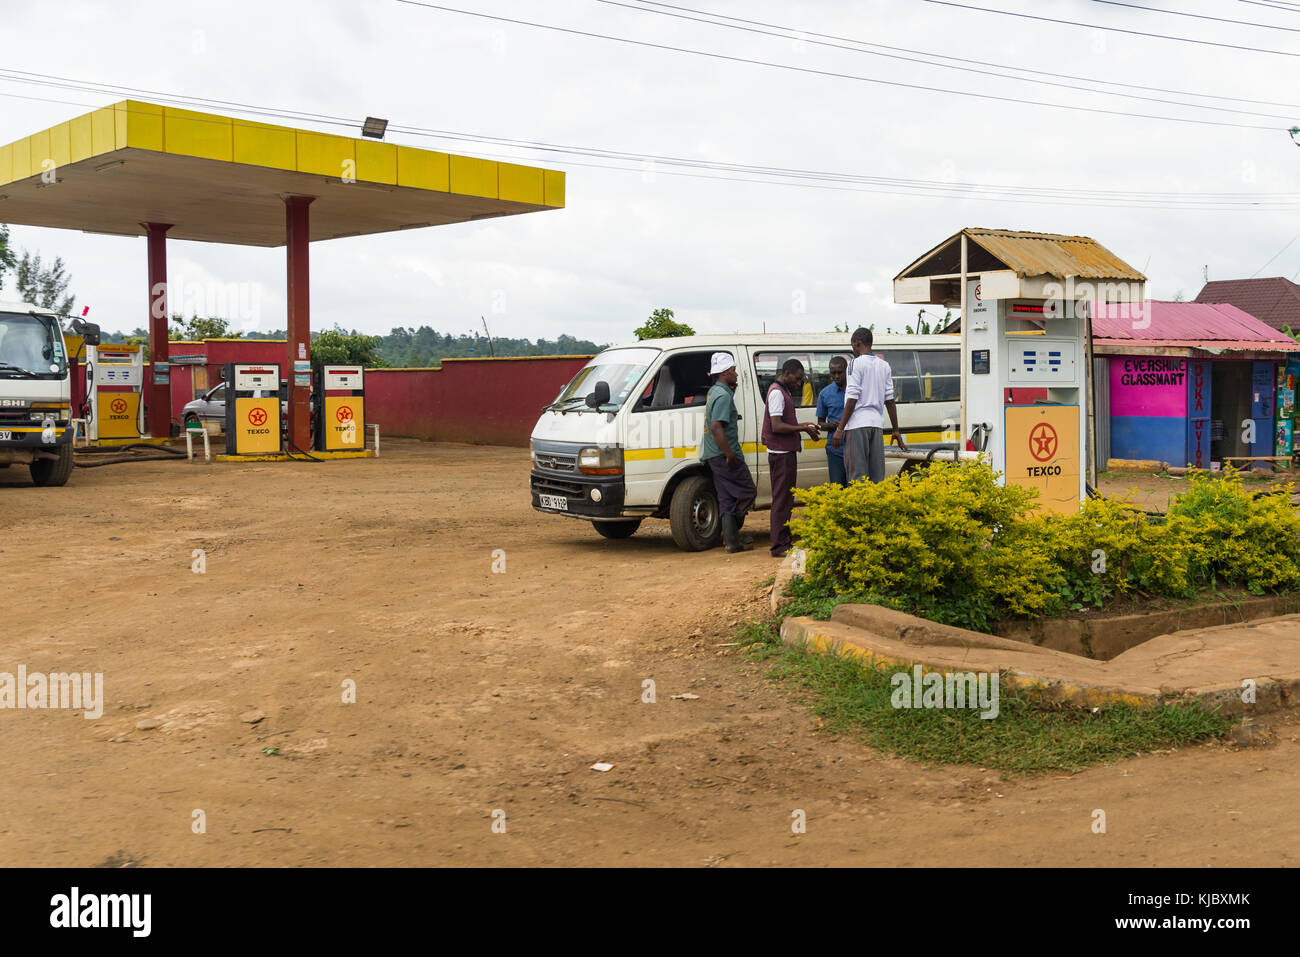 Typical African small petrol station with a matatu minibus and people filling up with fuel, Kenya, East Africa Stock Photo